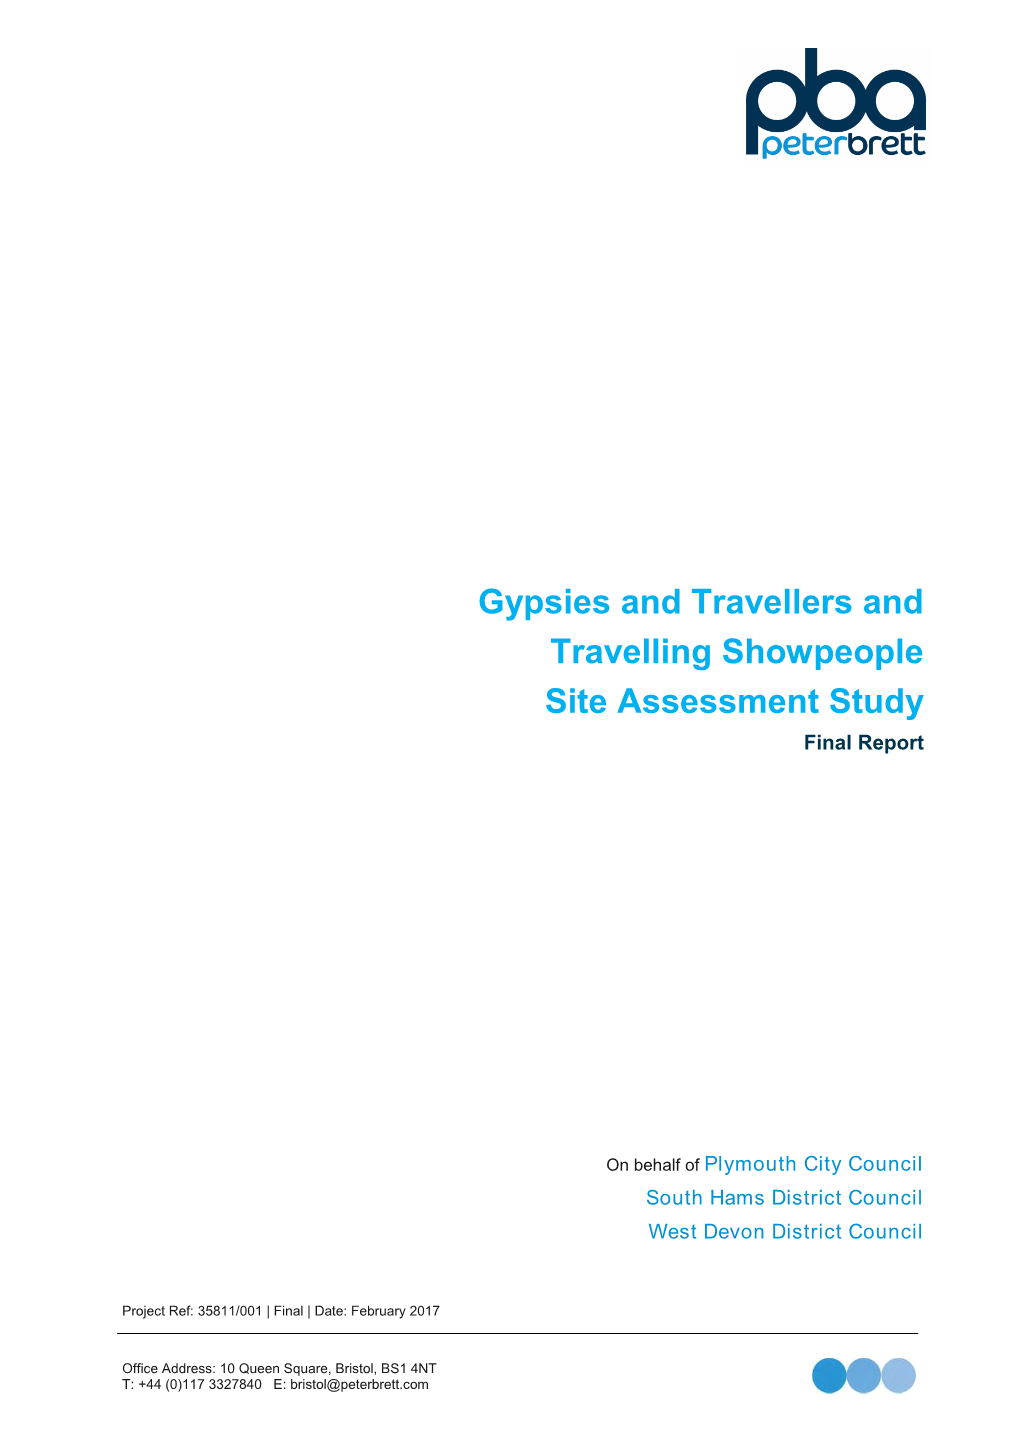 Gypsies and Travellers and Travelling Showpeople Site Assessment Study Final Report